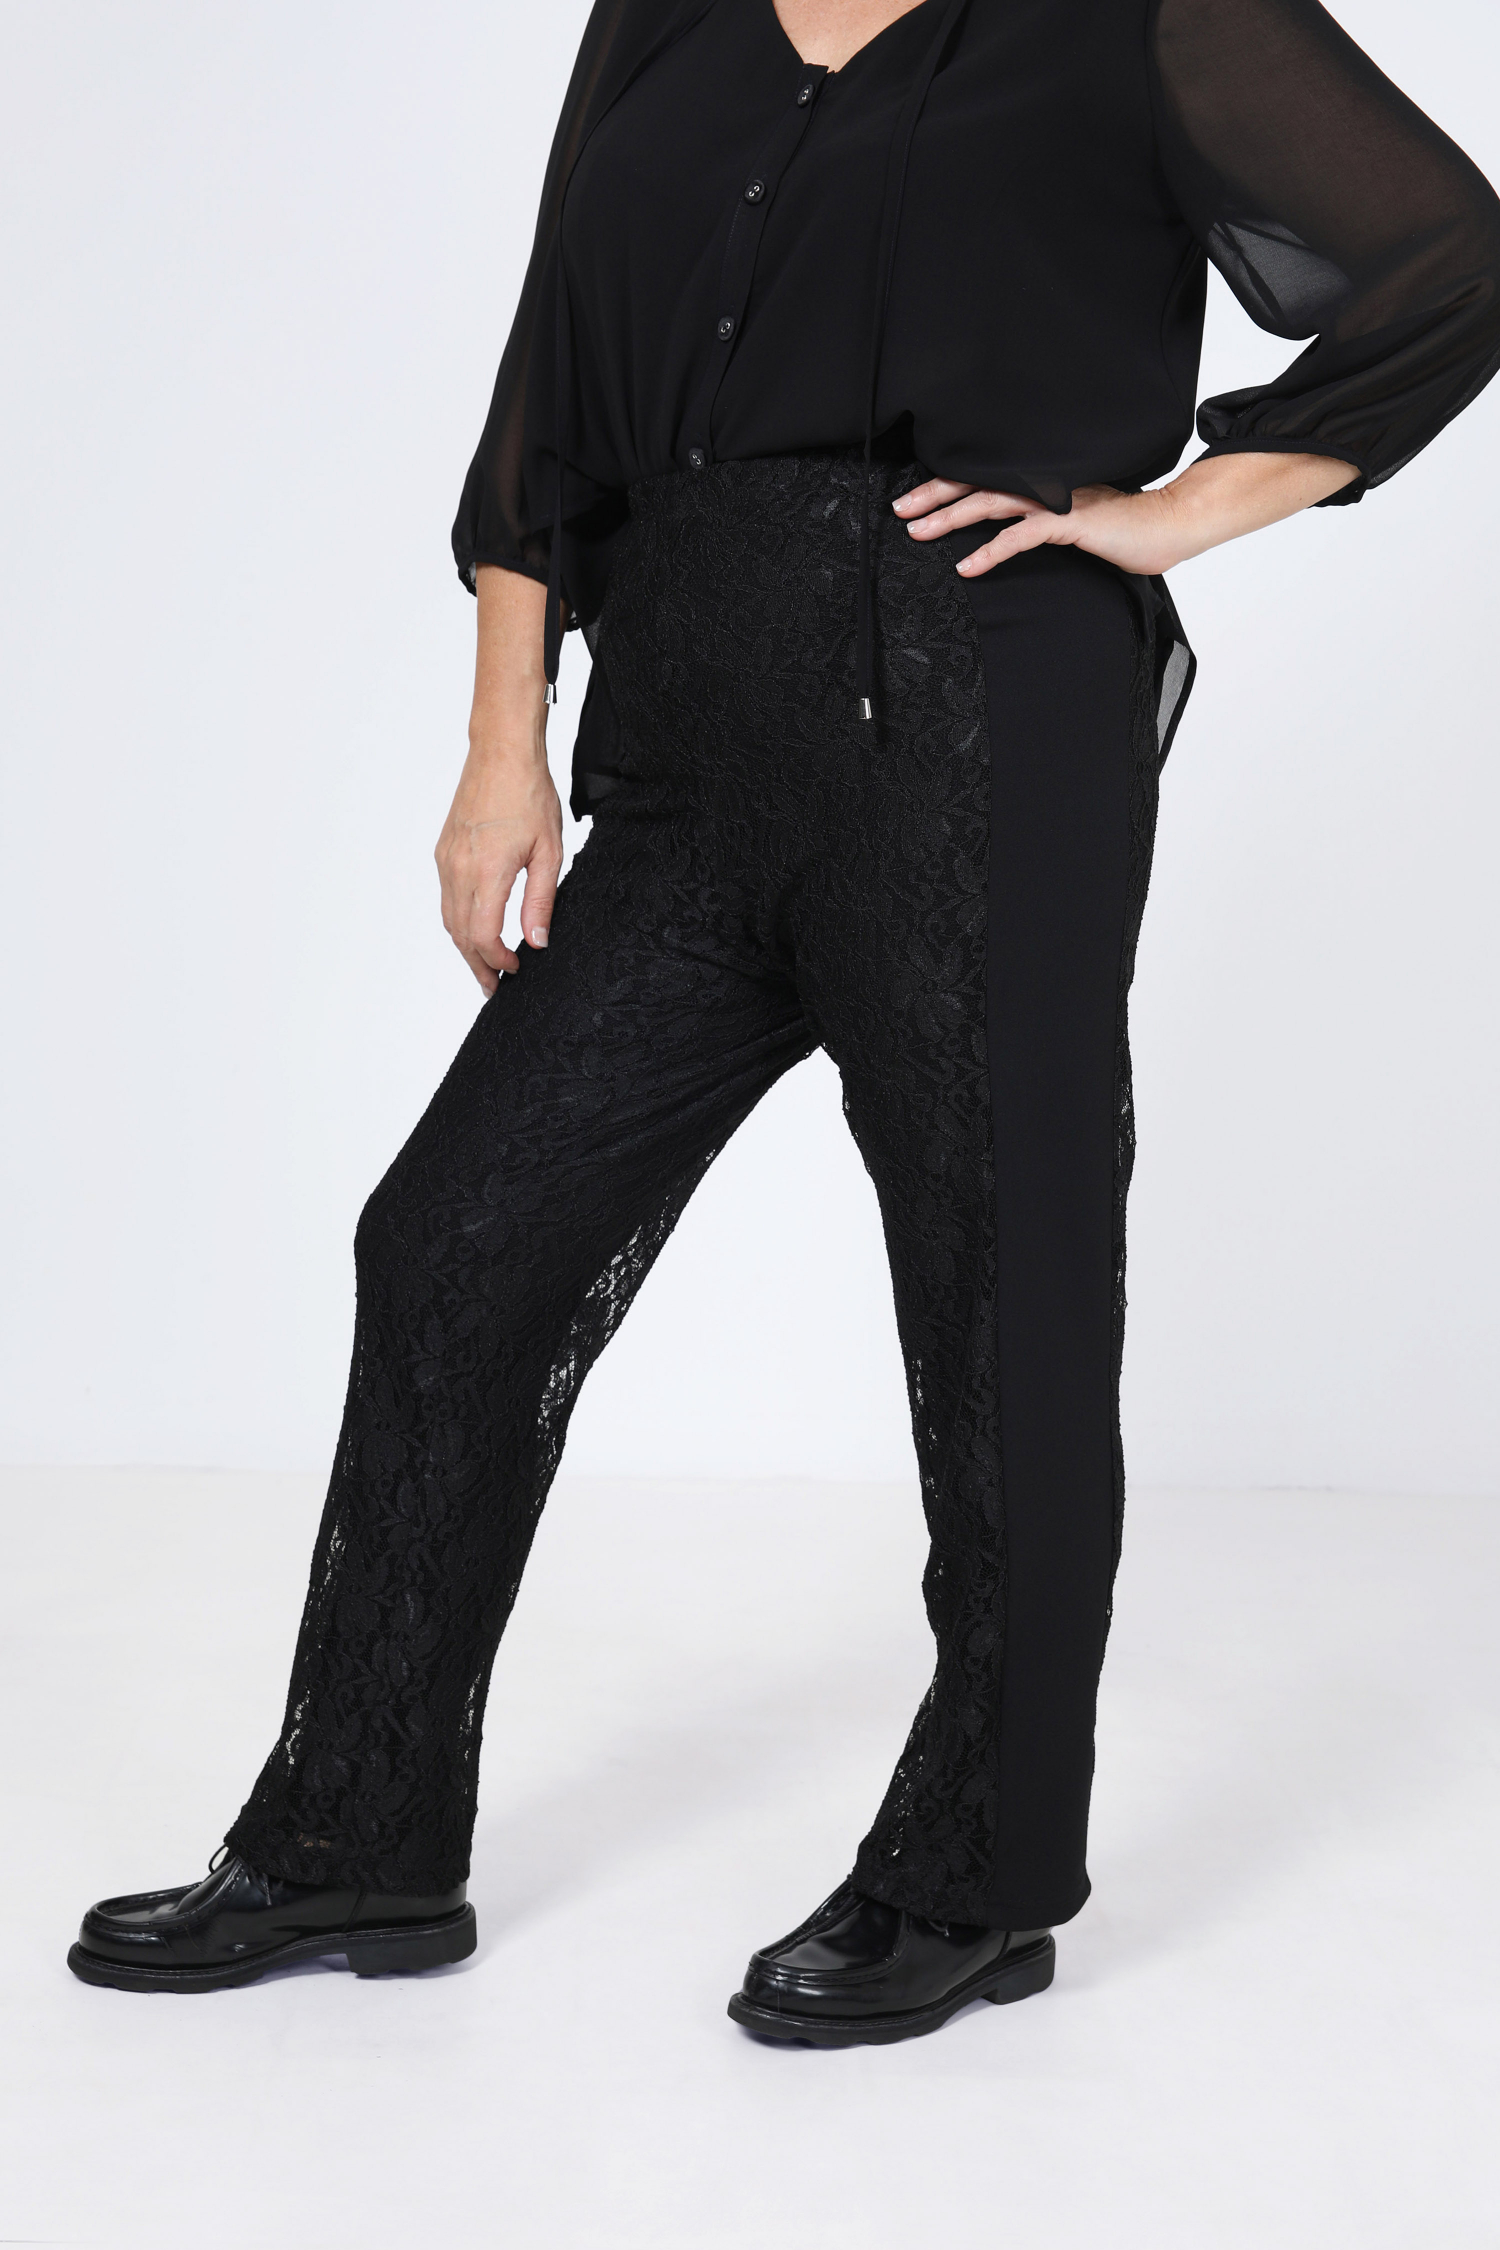 Dual-material lace and crepe pants